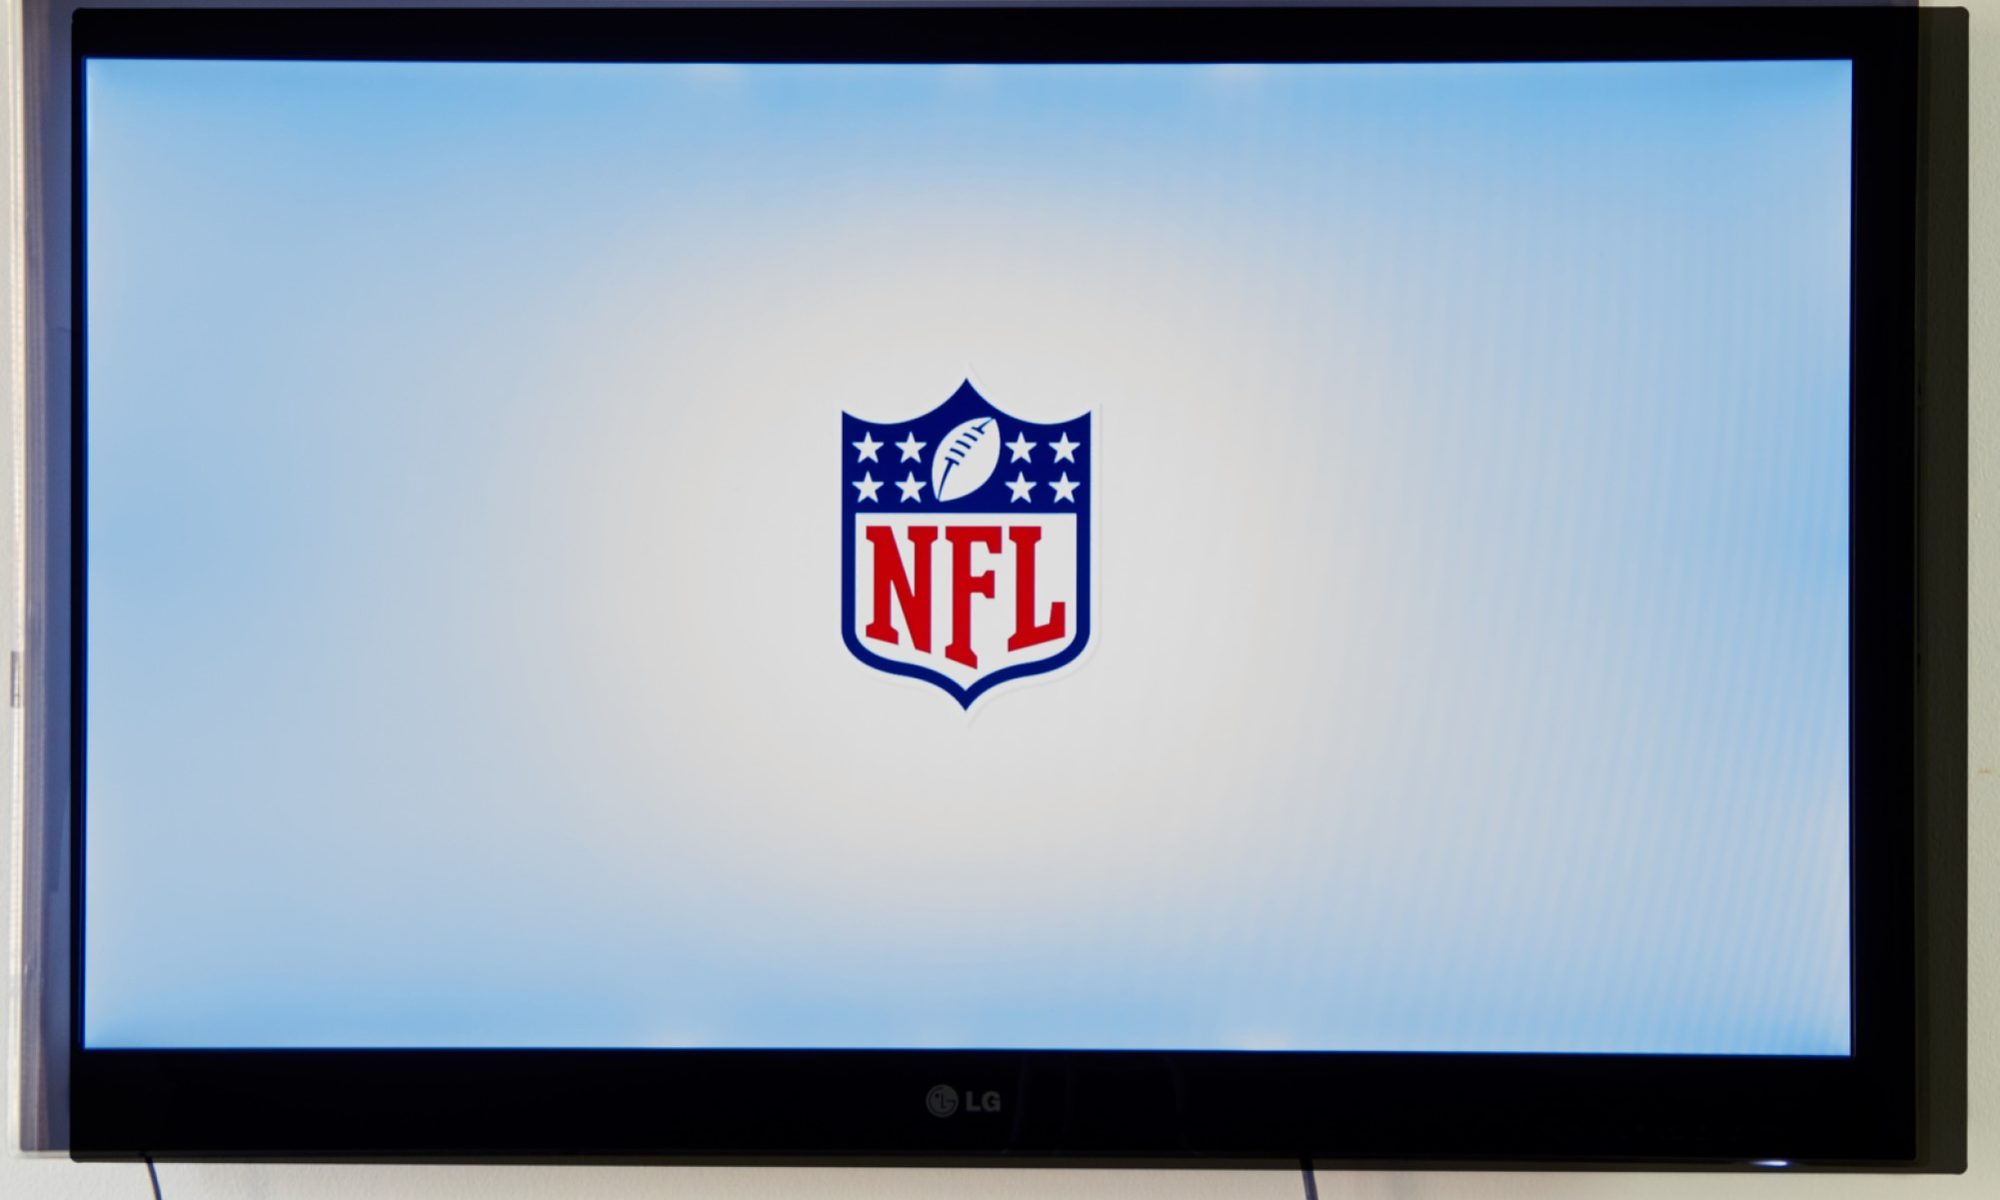 photograph of NFL logo on TV screen